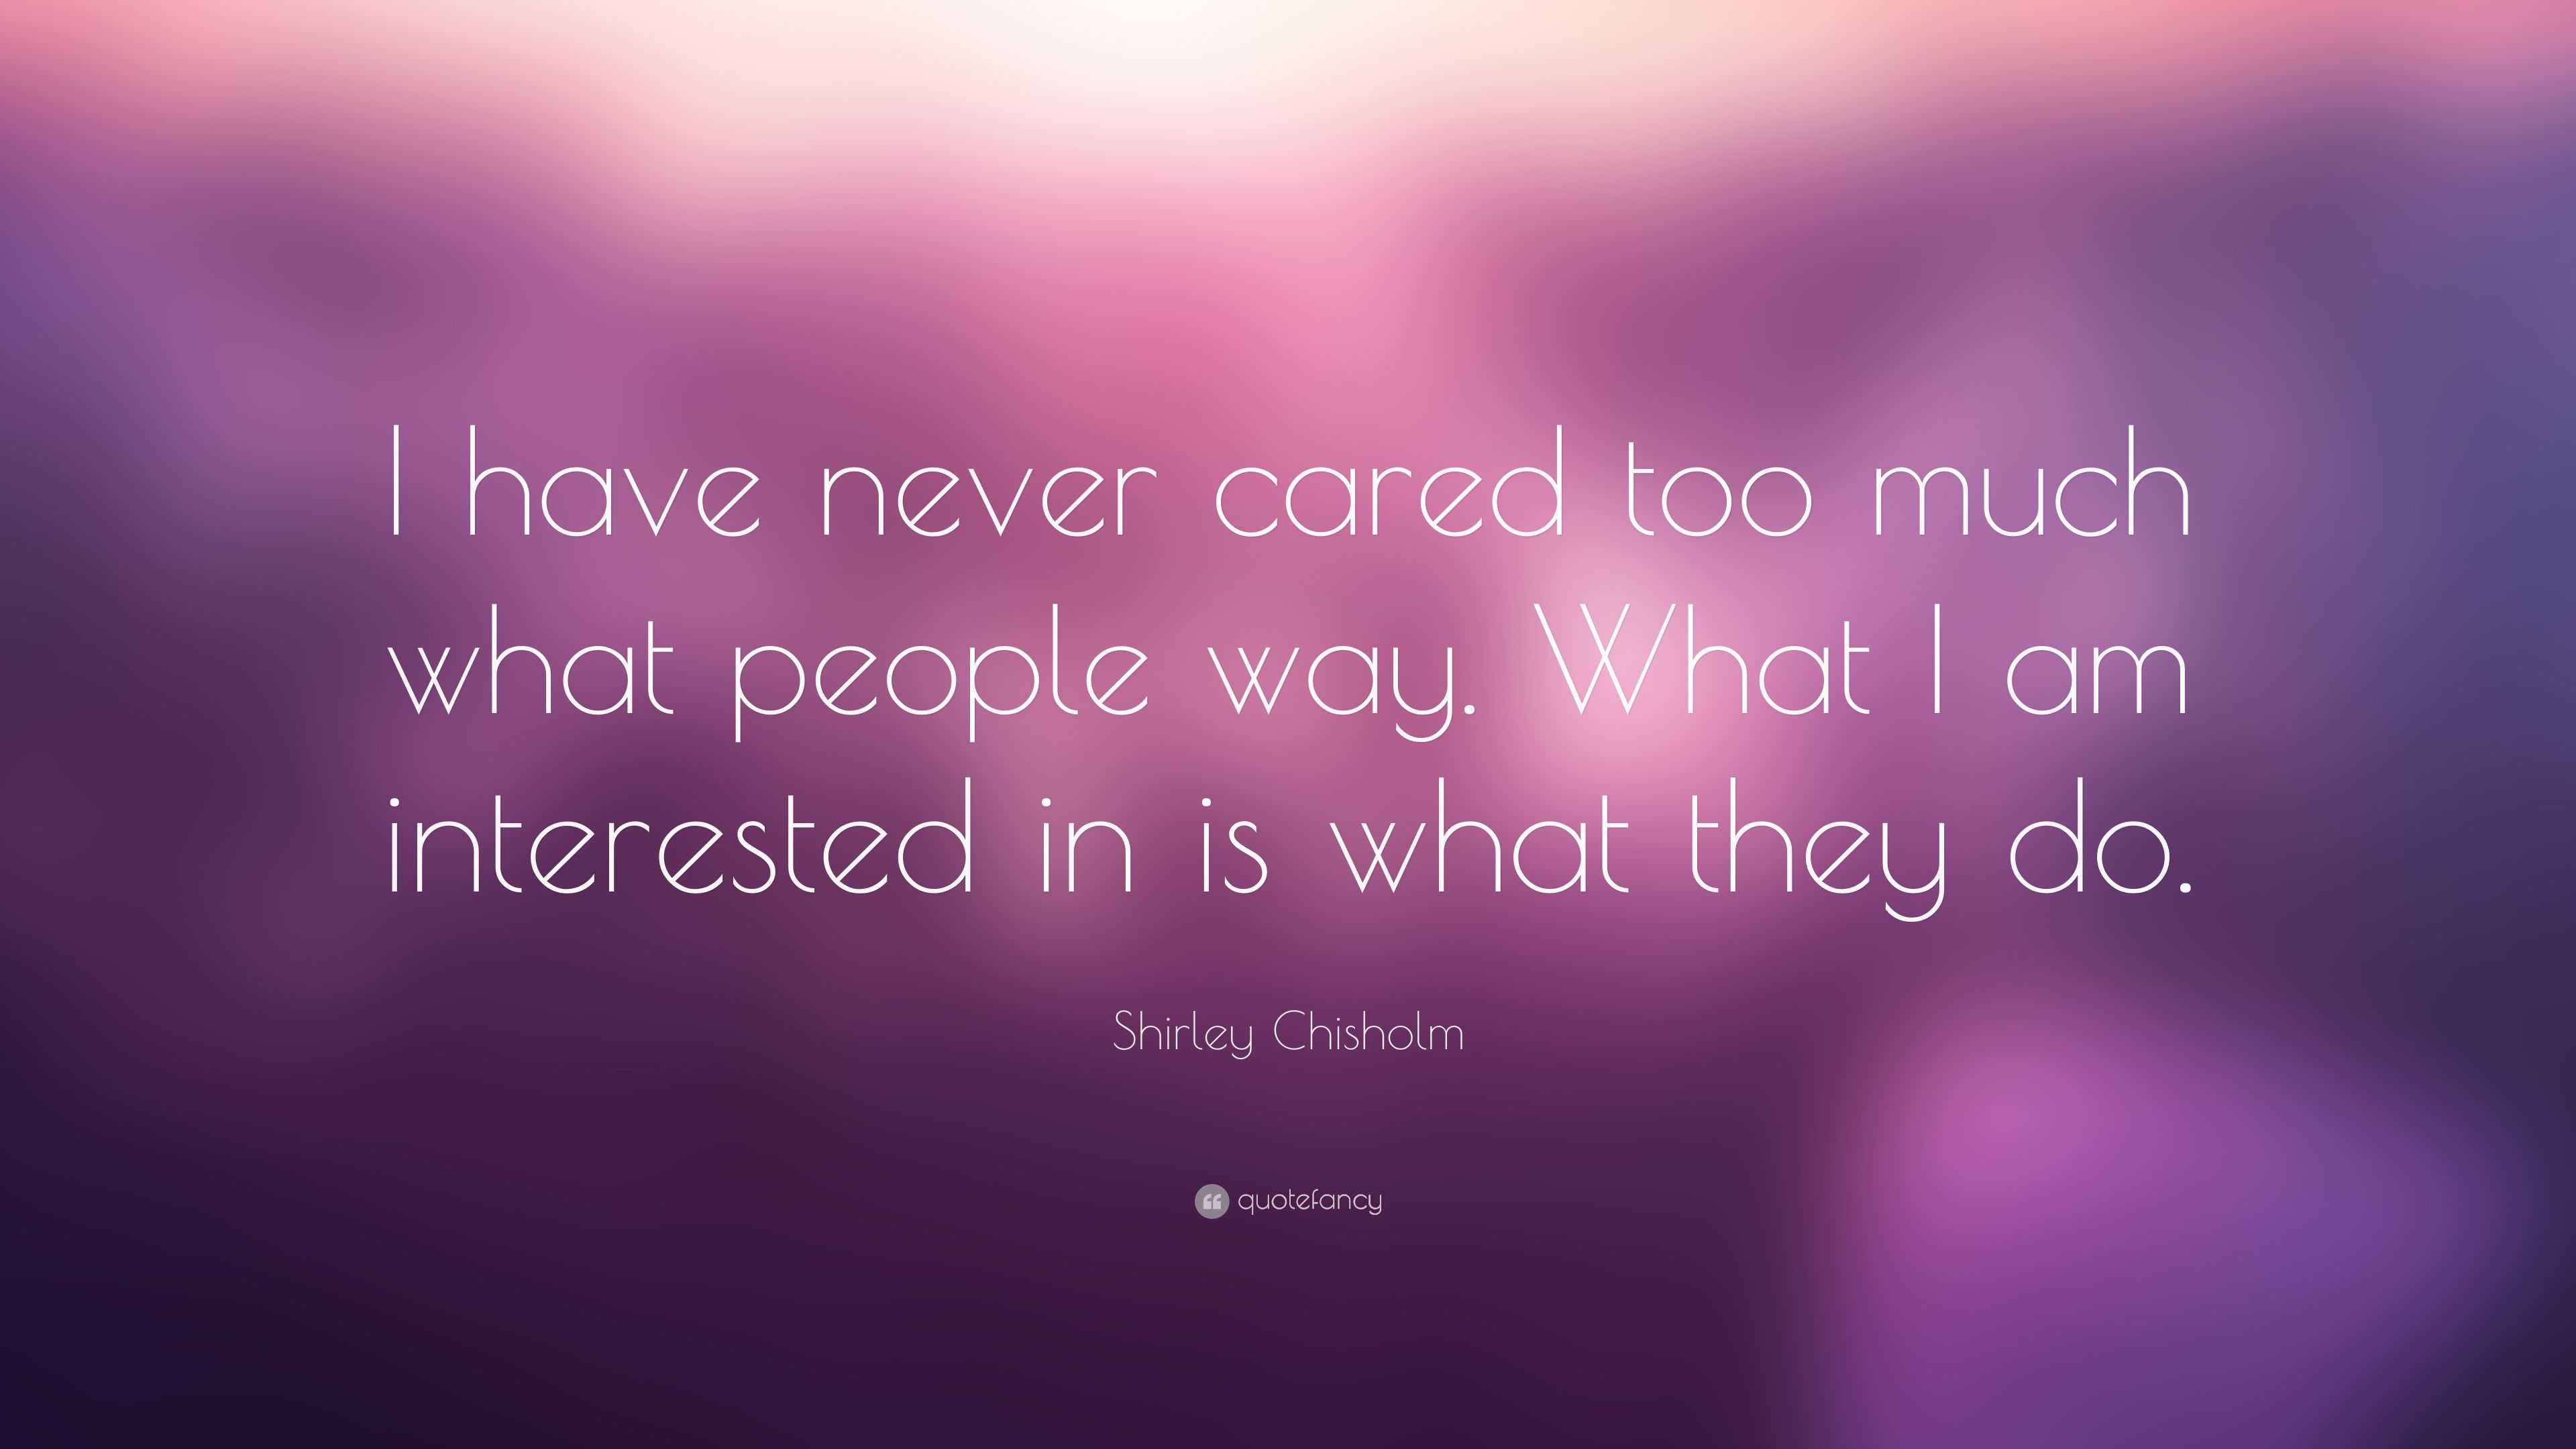 Shirley Chisholm Quote “I have never cared too much what people way